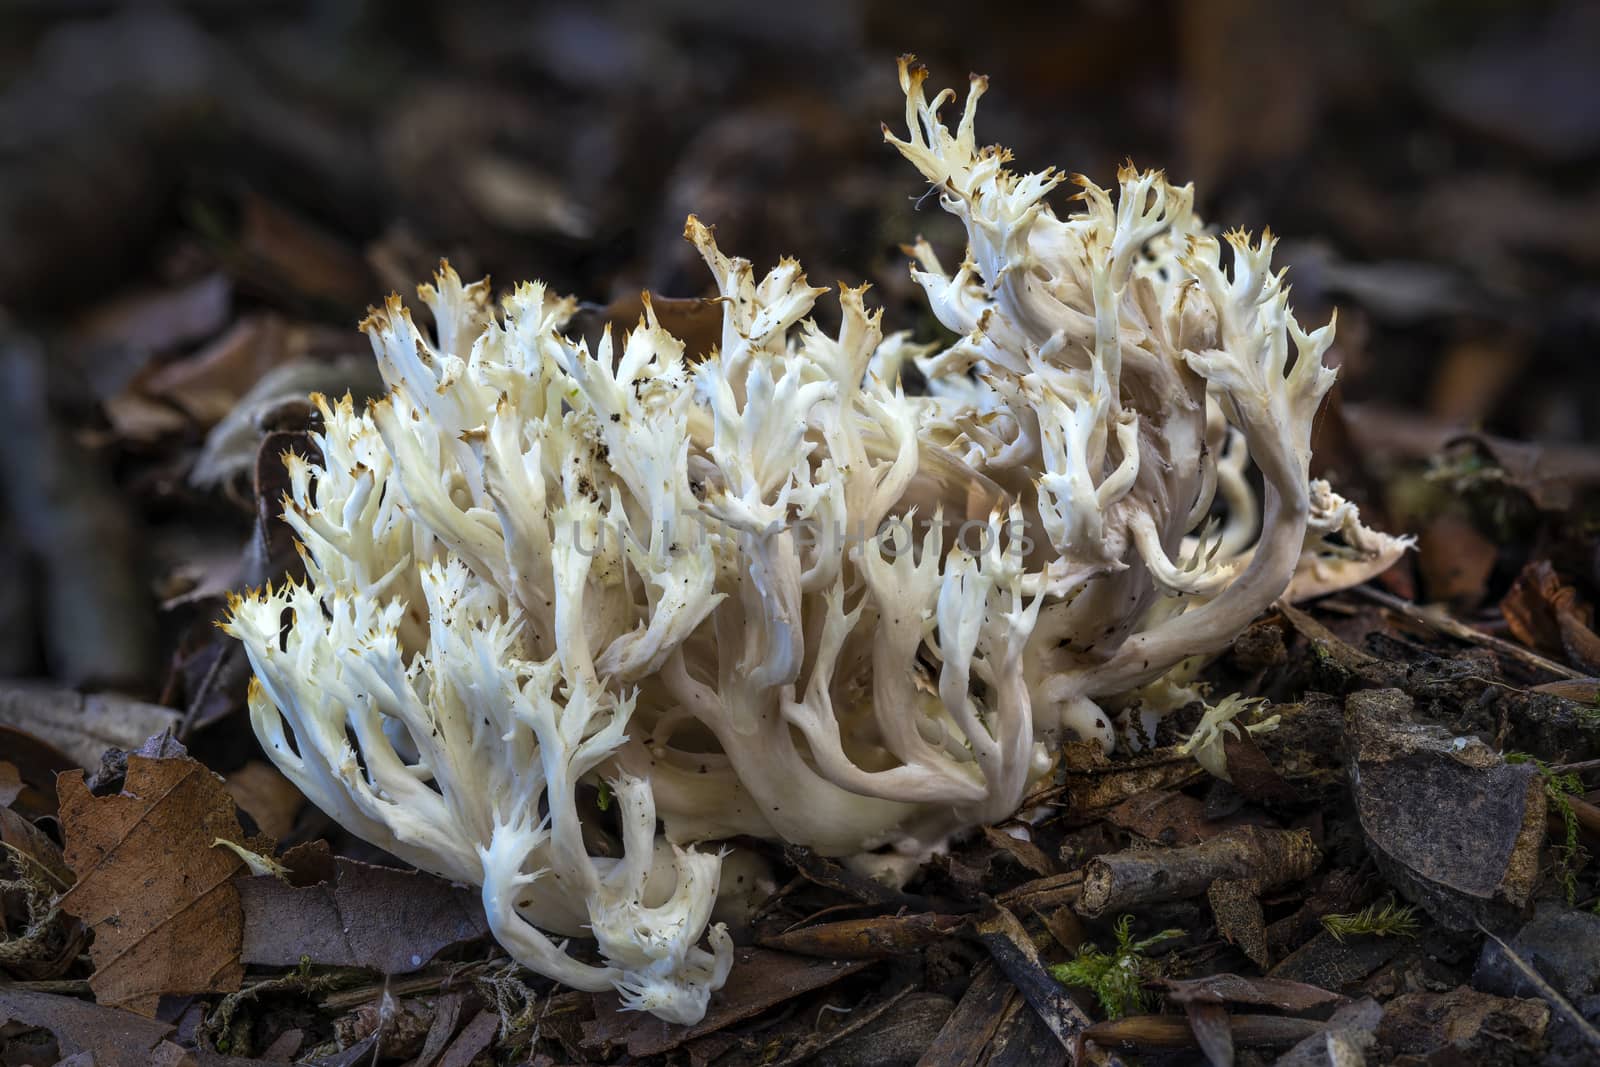 Coral fungus found in Autumn fall woodland forests